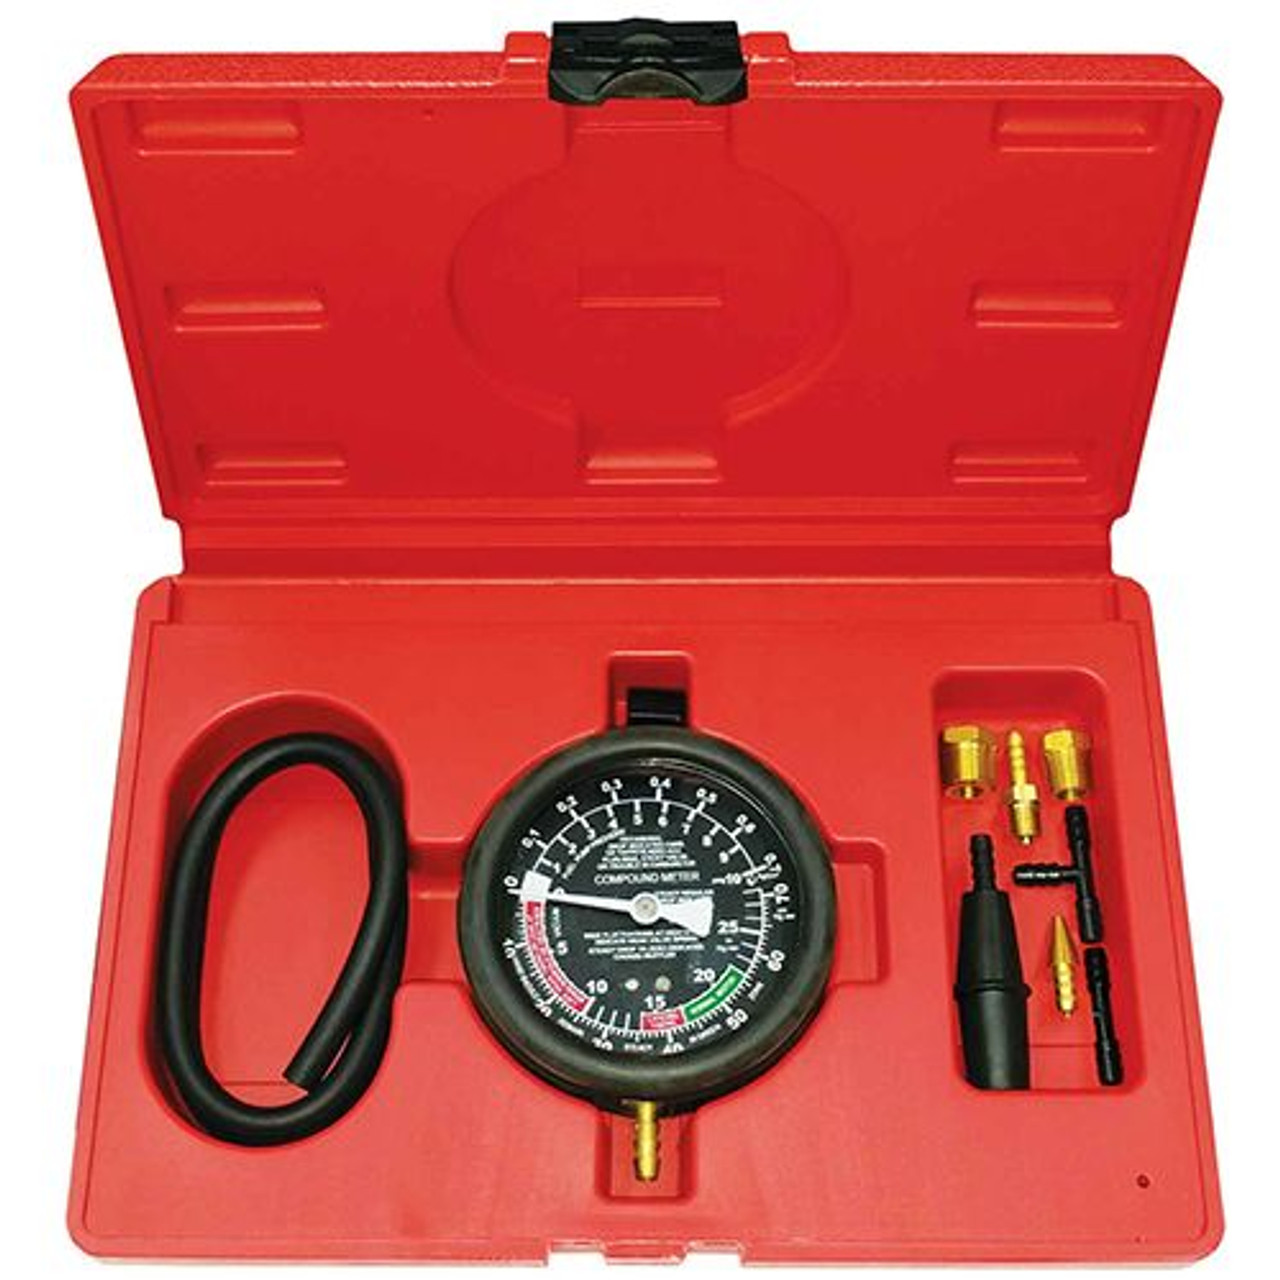 9pc Vacuum & Fuel pump tester PT60401 - Robson's Tool King Store